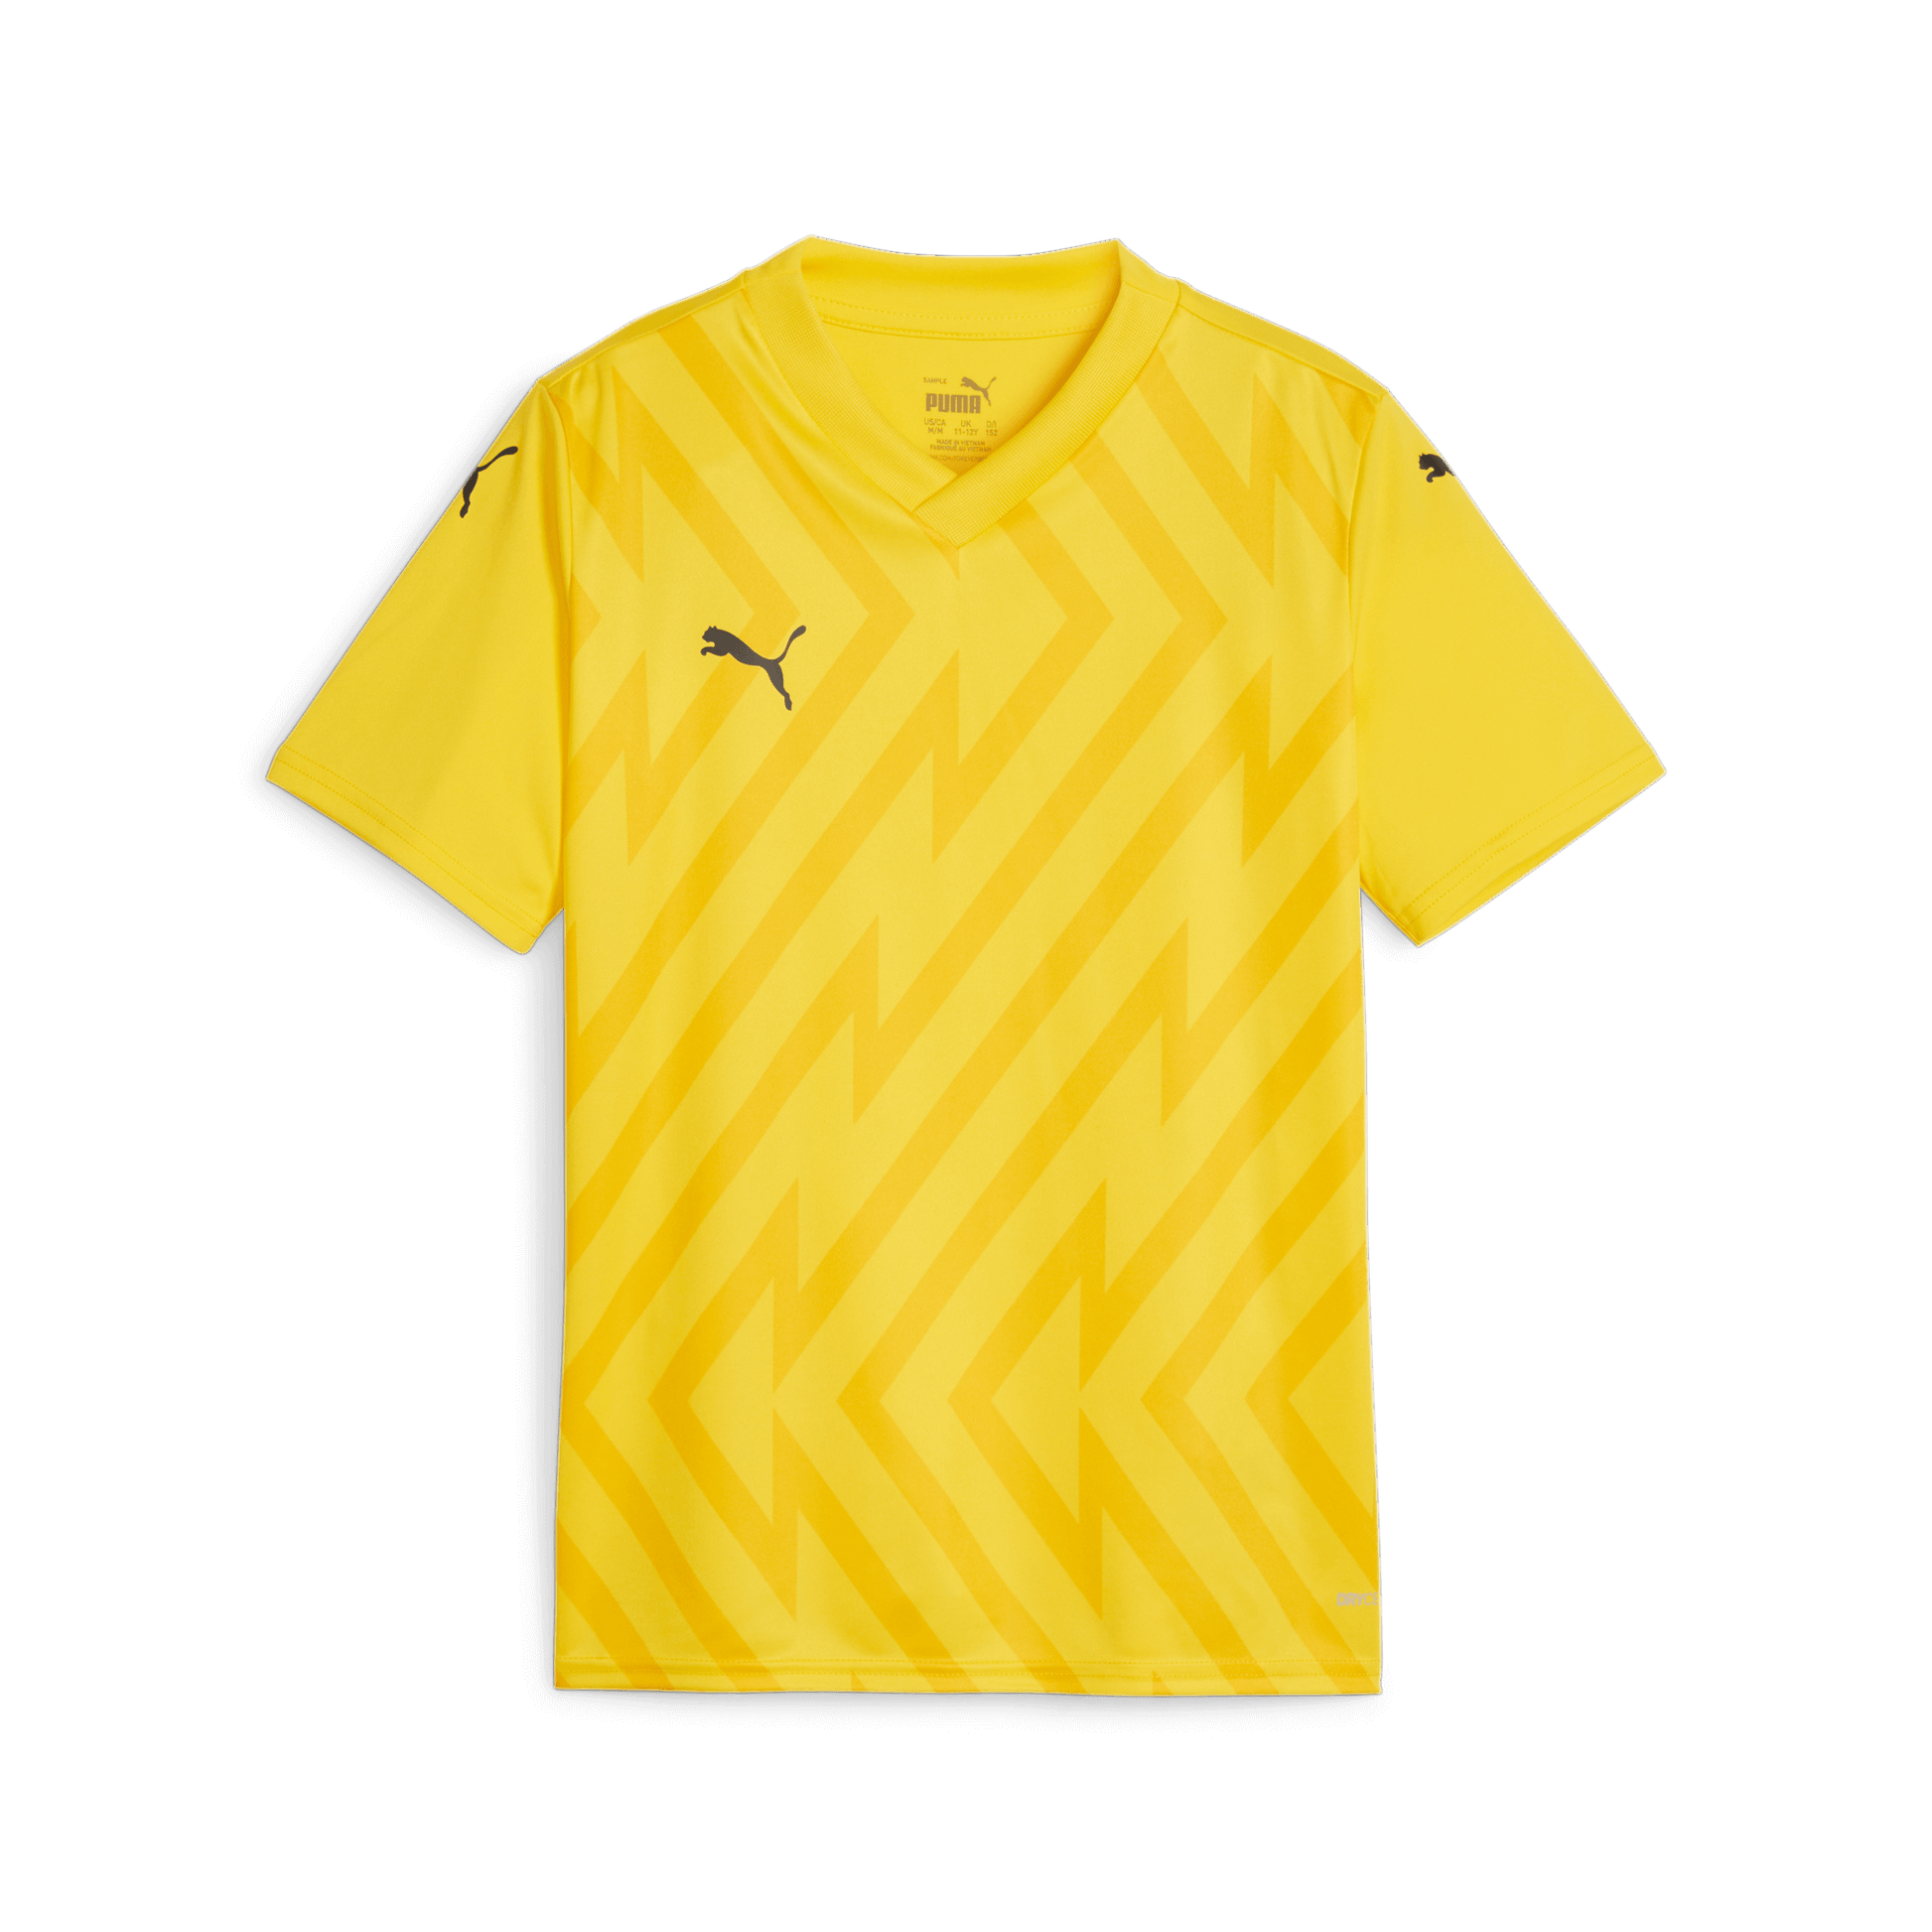 Puma YOUTH Team Goal 26 Jersey-Faster Yellow-Puma Black-Yellow Sizzle (Front)